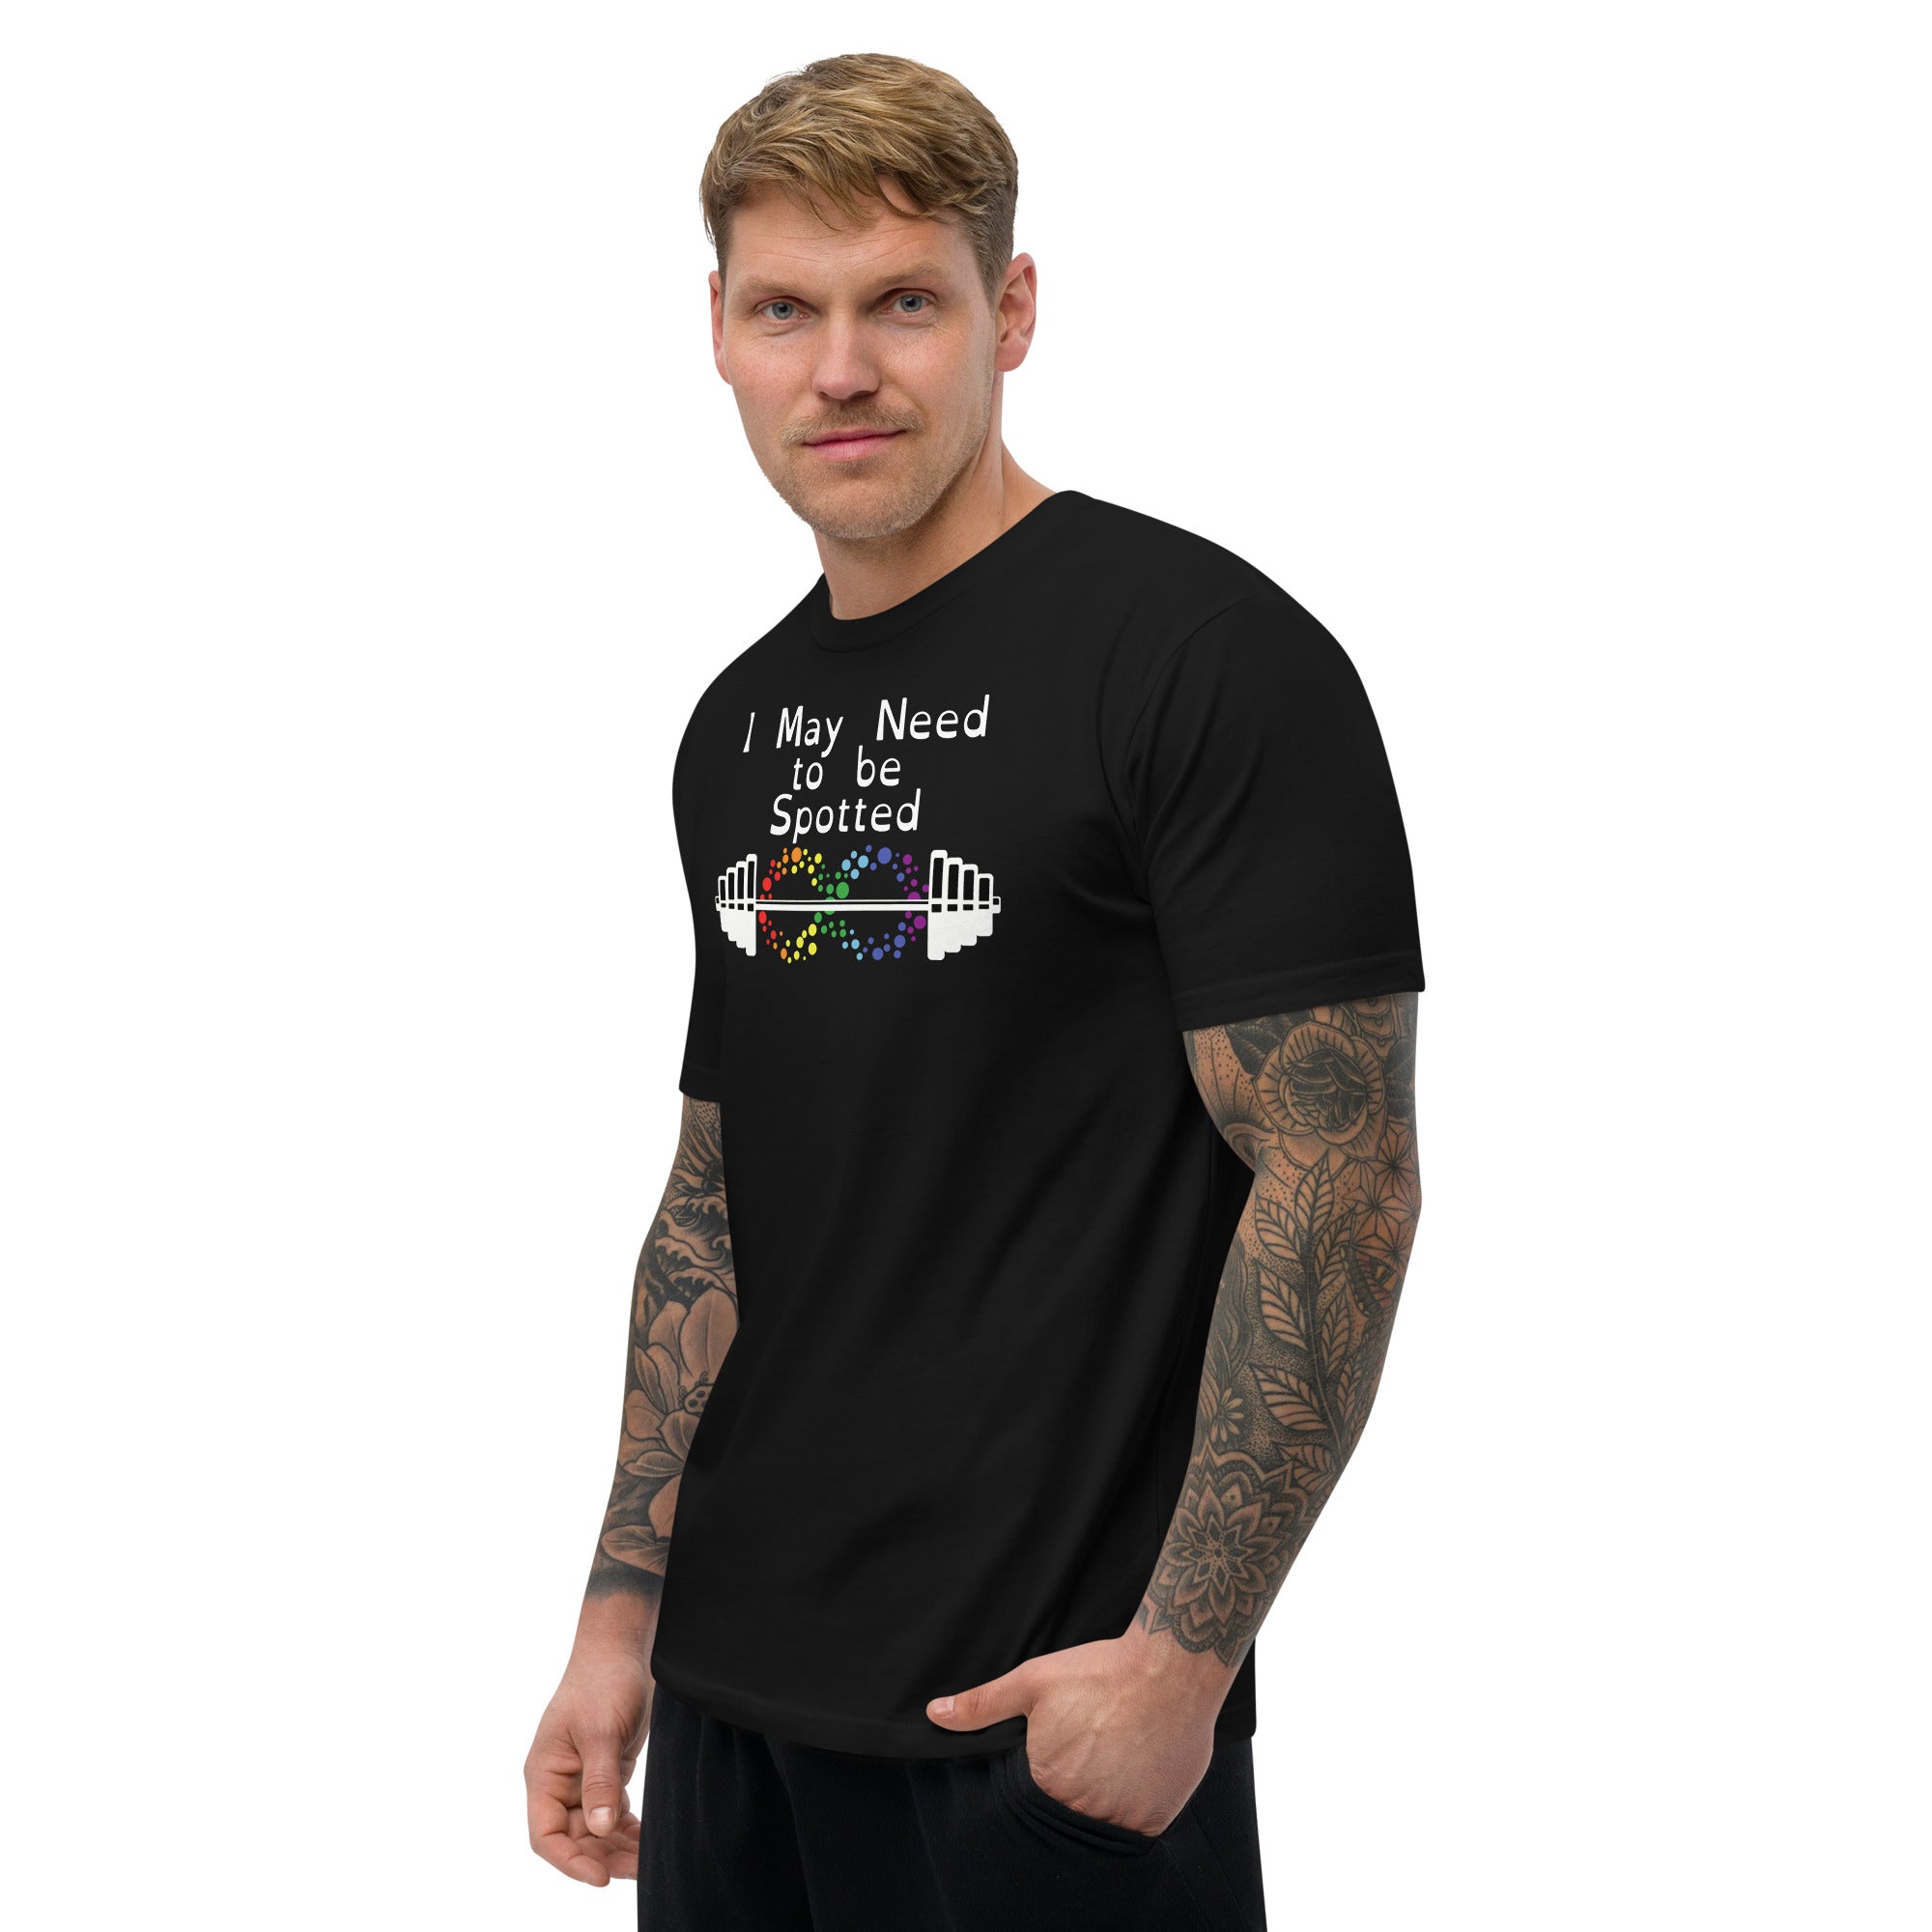 I May Need to be Spotted Men's Fitted Short Sleeve T-shirt